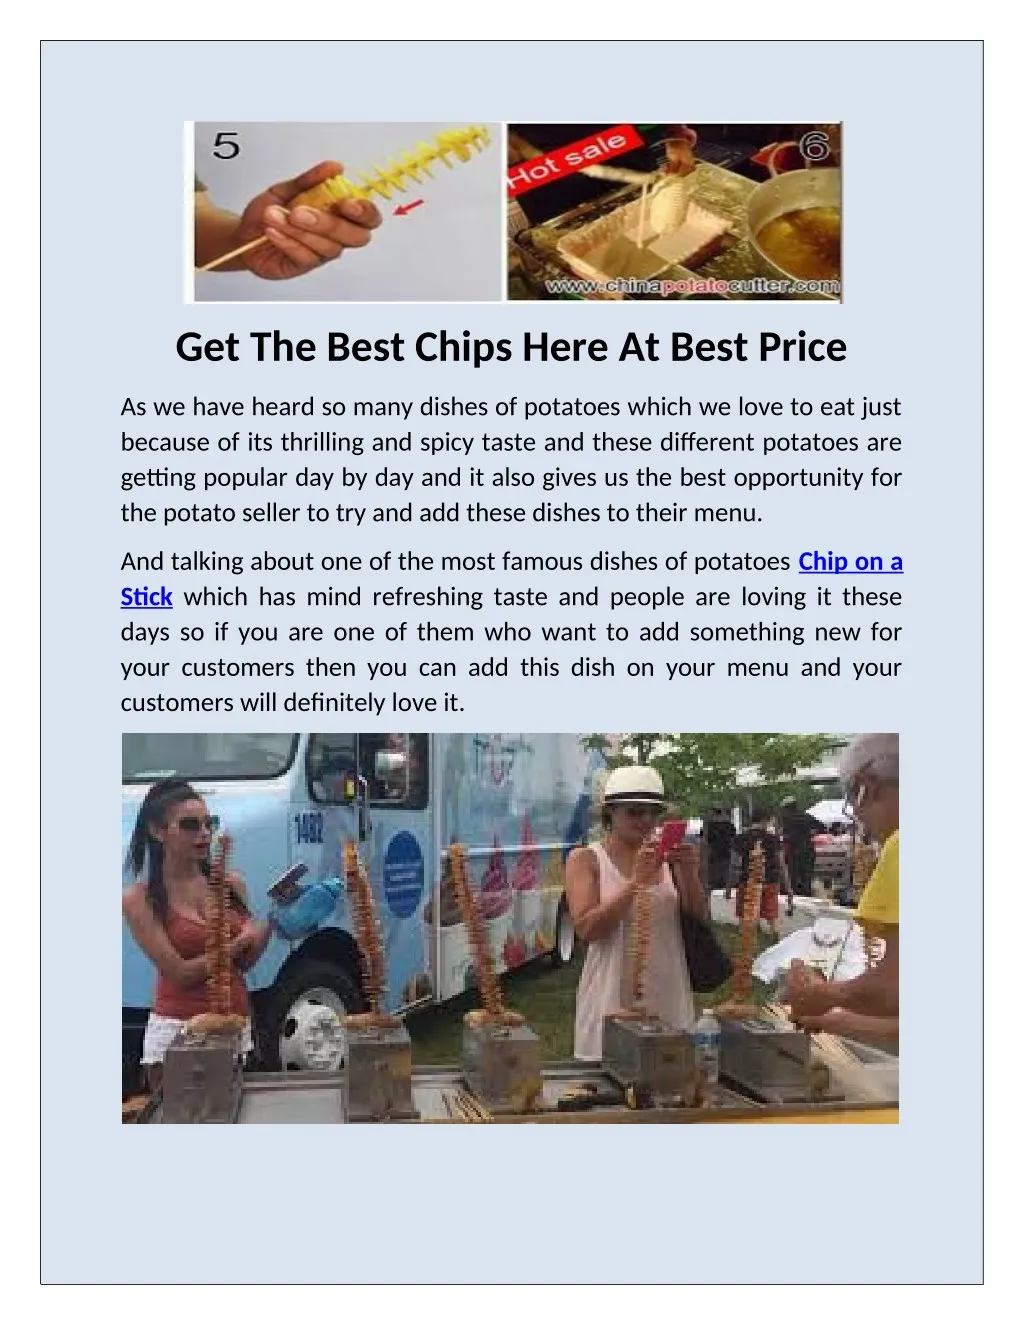 get the best chips here at best price